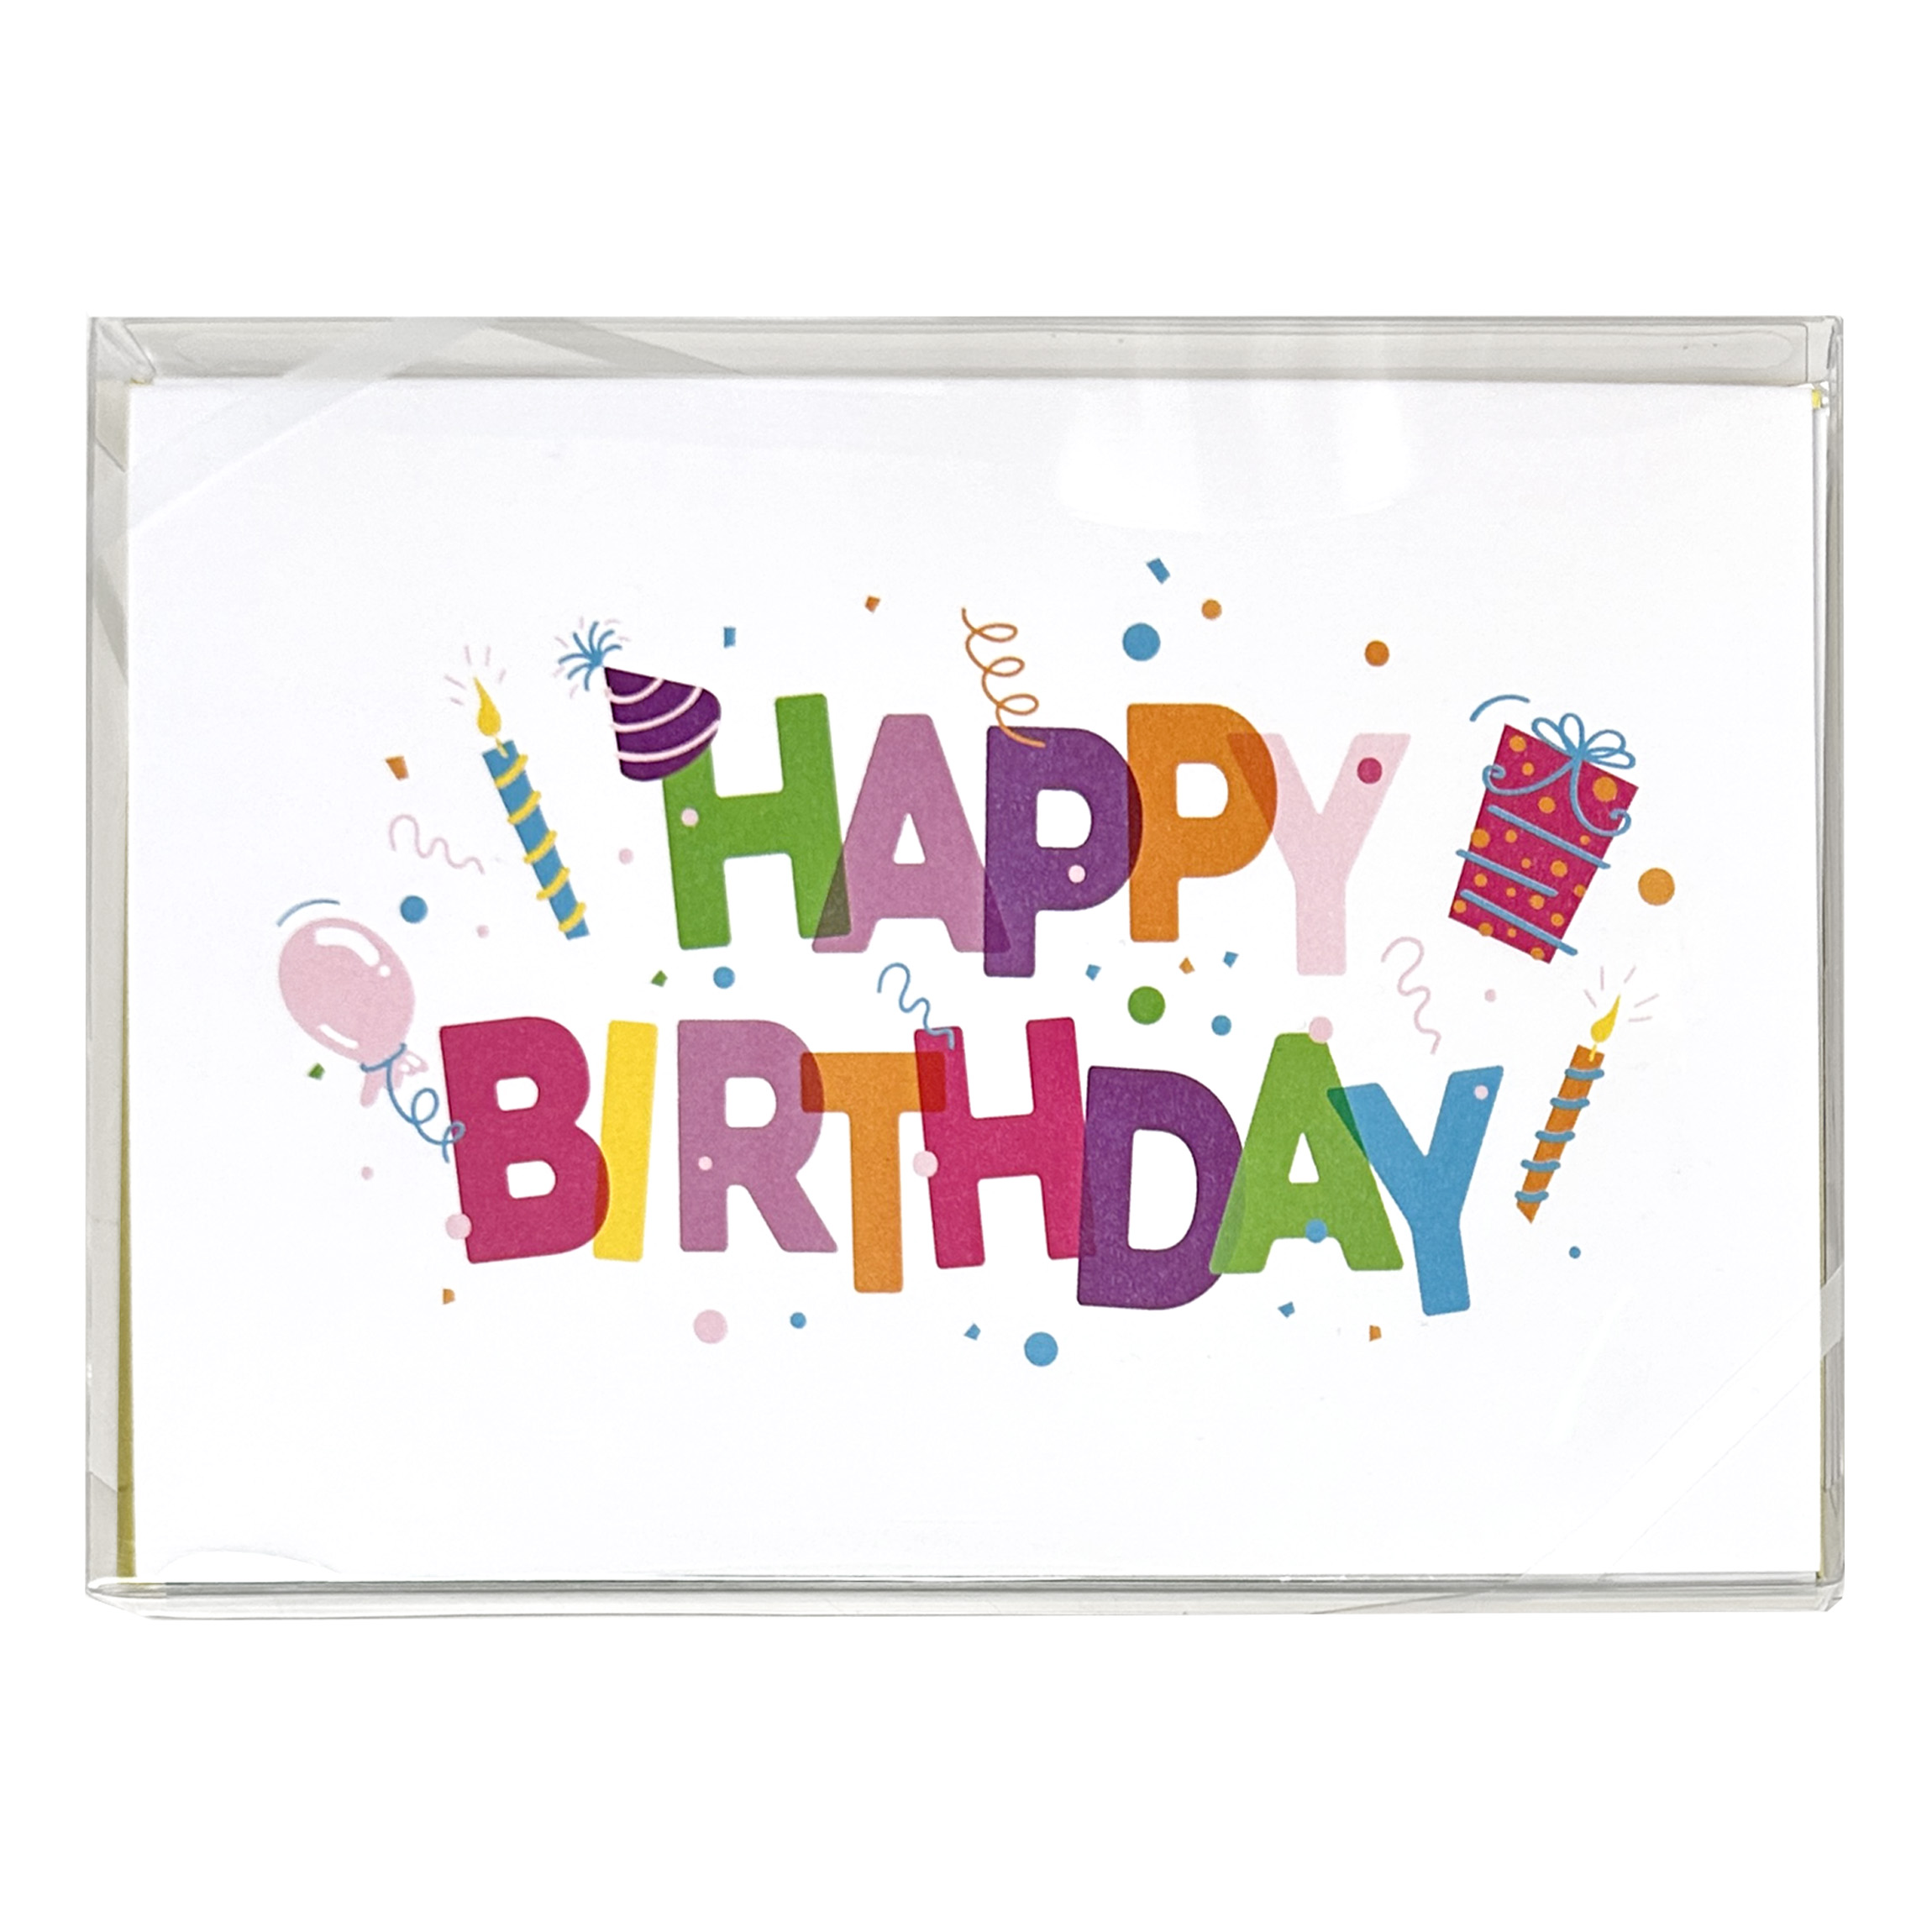 Happy Birthday Card Photos and Images